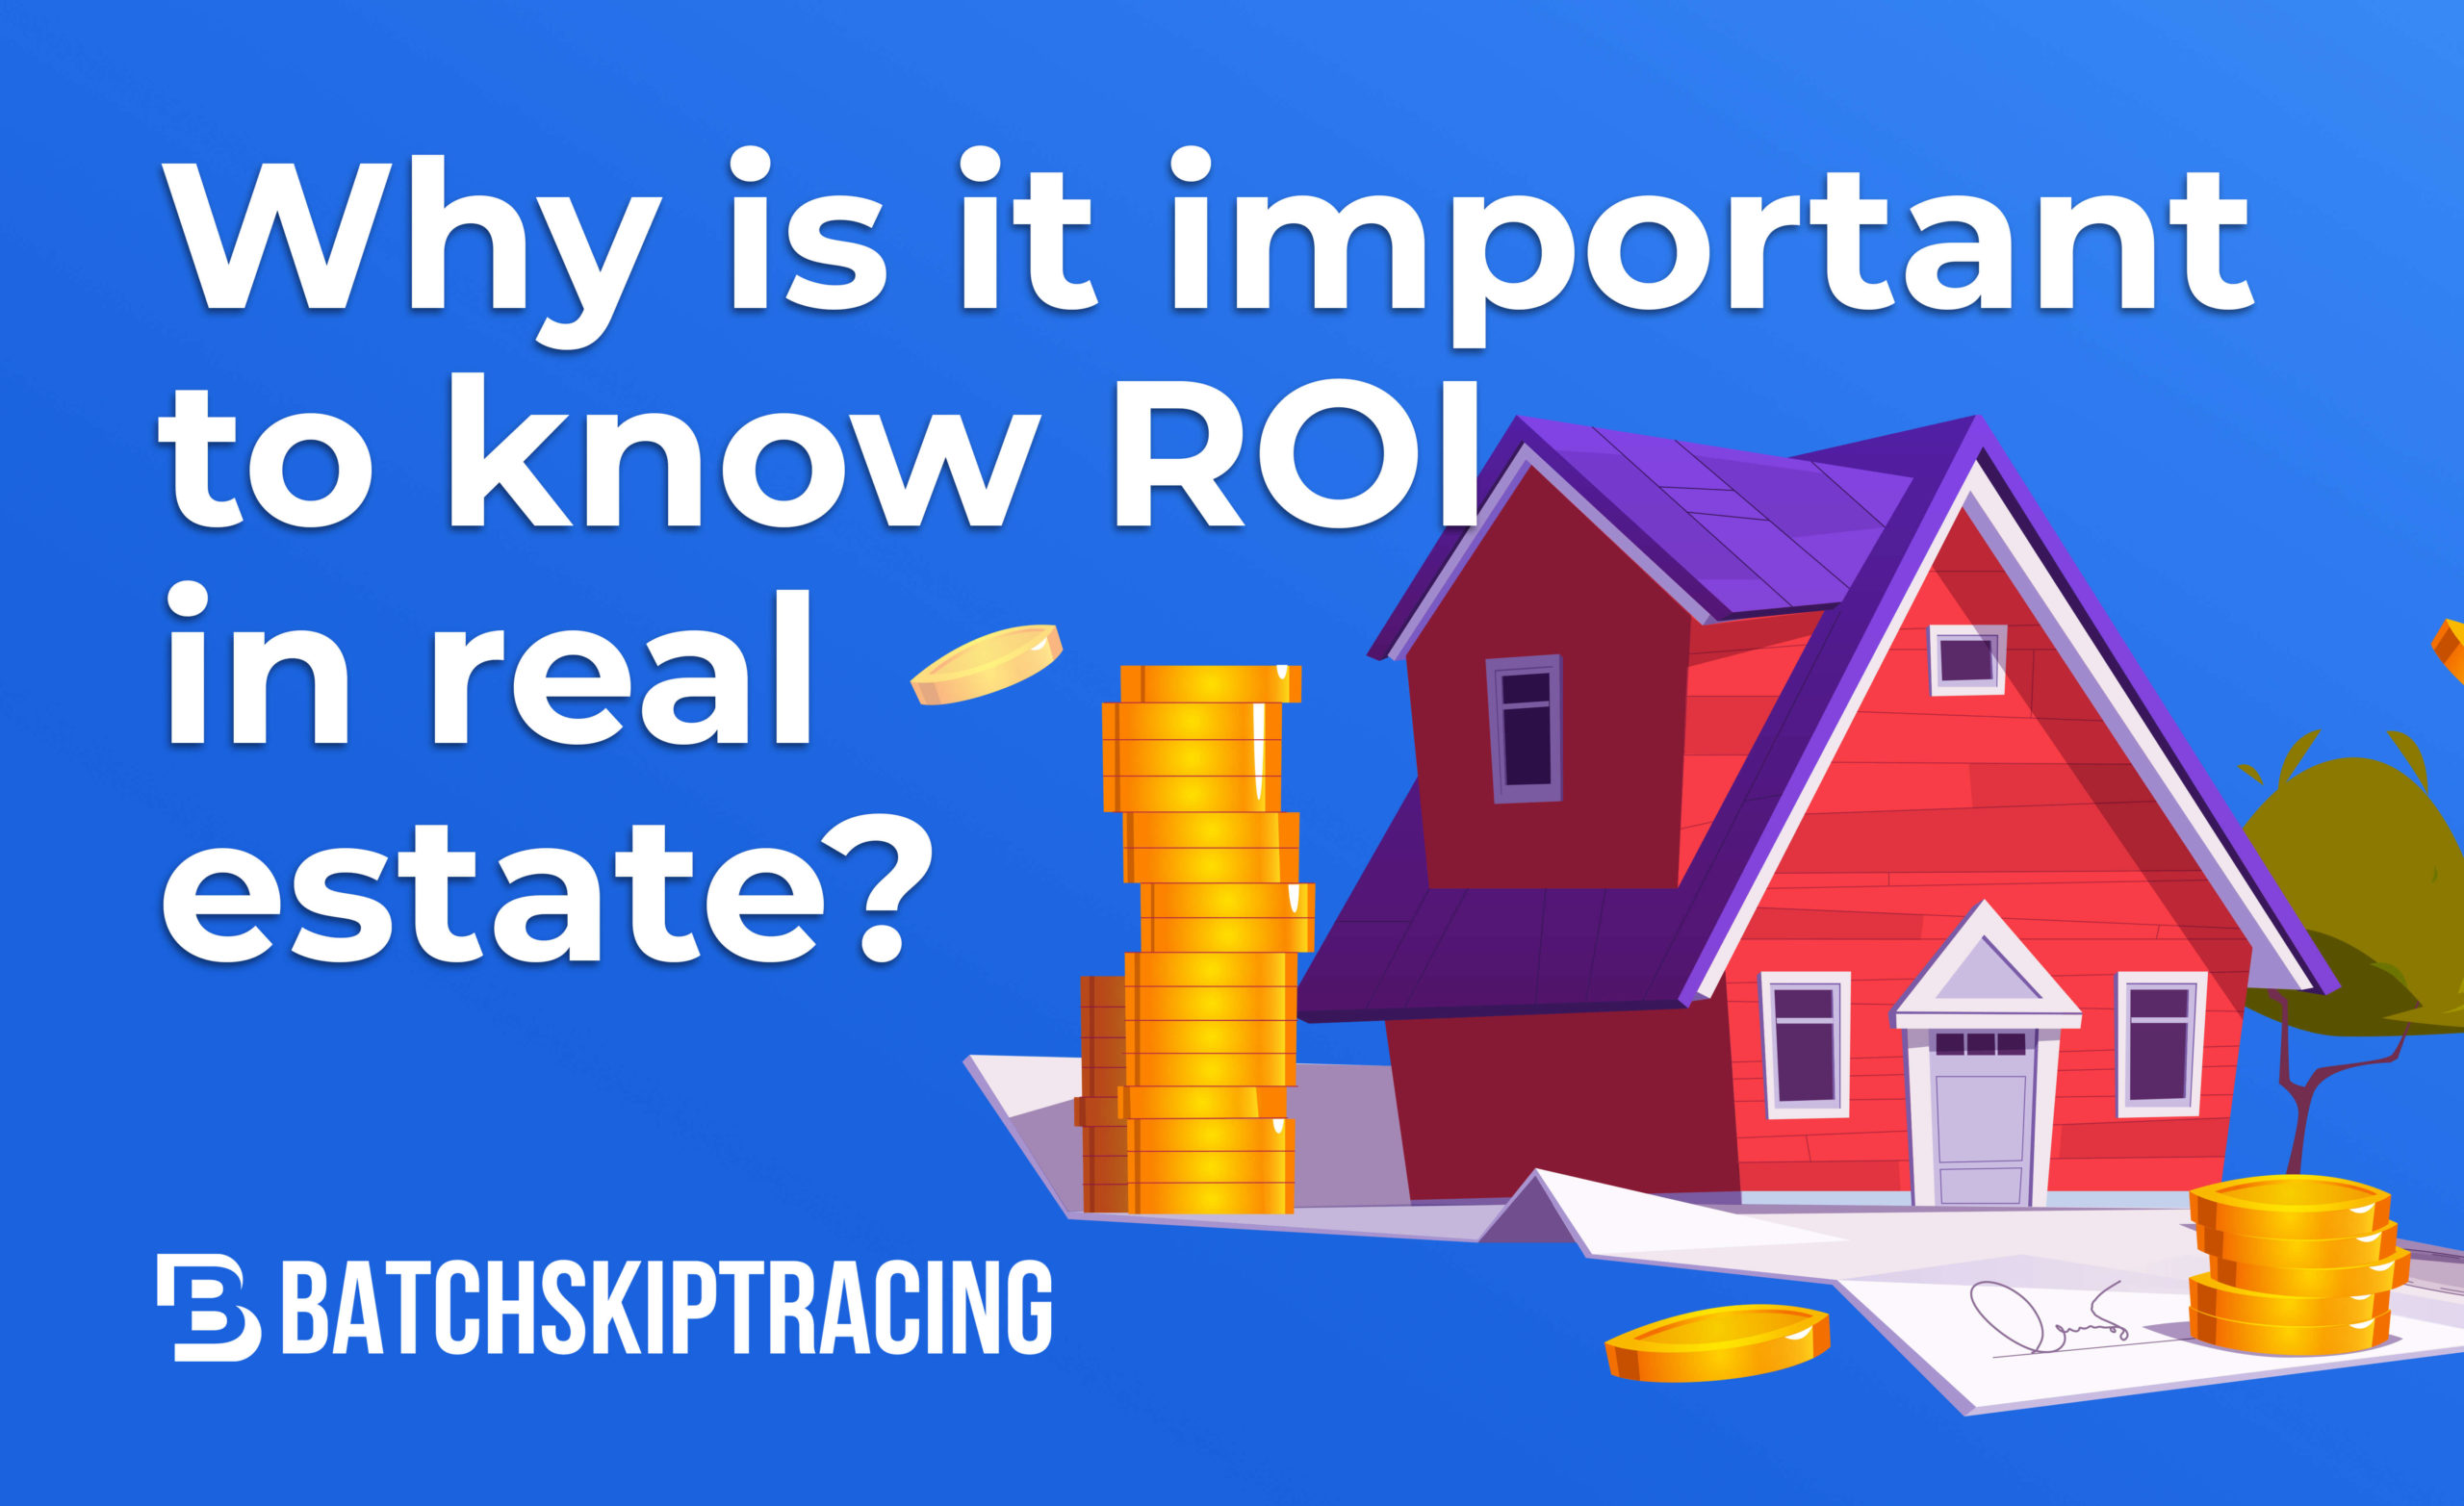 WHY IS IT IMPORTANT TO KNOW ROI IN REAL ESTATE